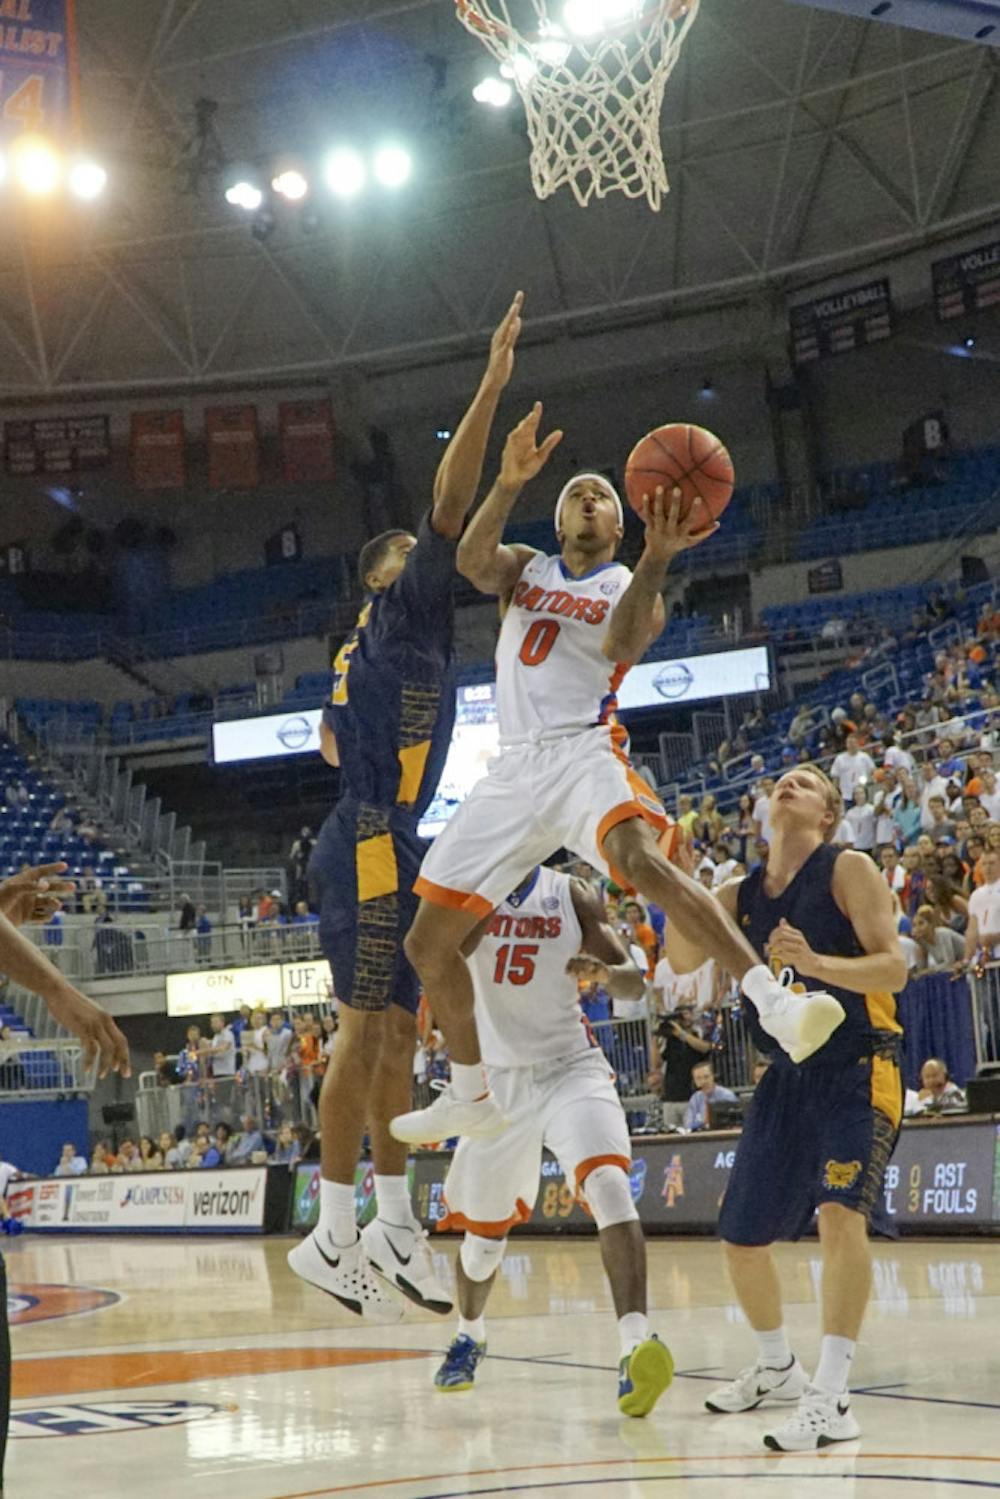 <p>UF point guard Kasey Hill goes up for a layup during Florida's 104-54 win against North Carolina A&amp;T on Nov. 16, 2015, in the O'Connell Center.</p>